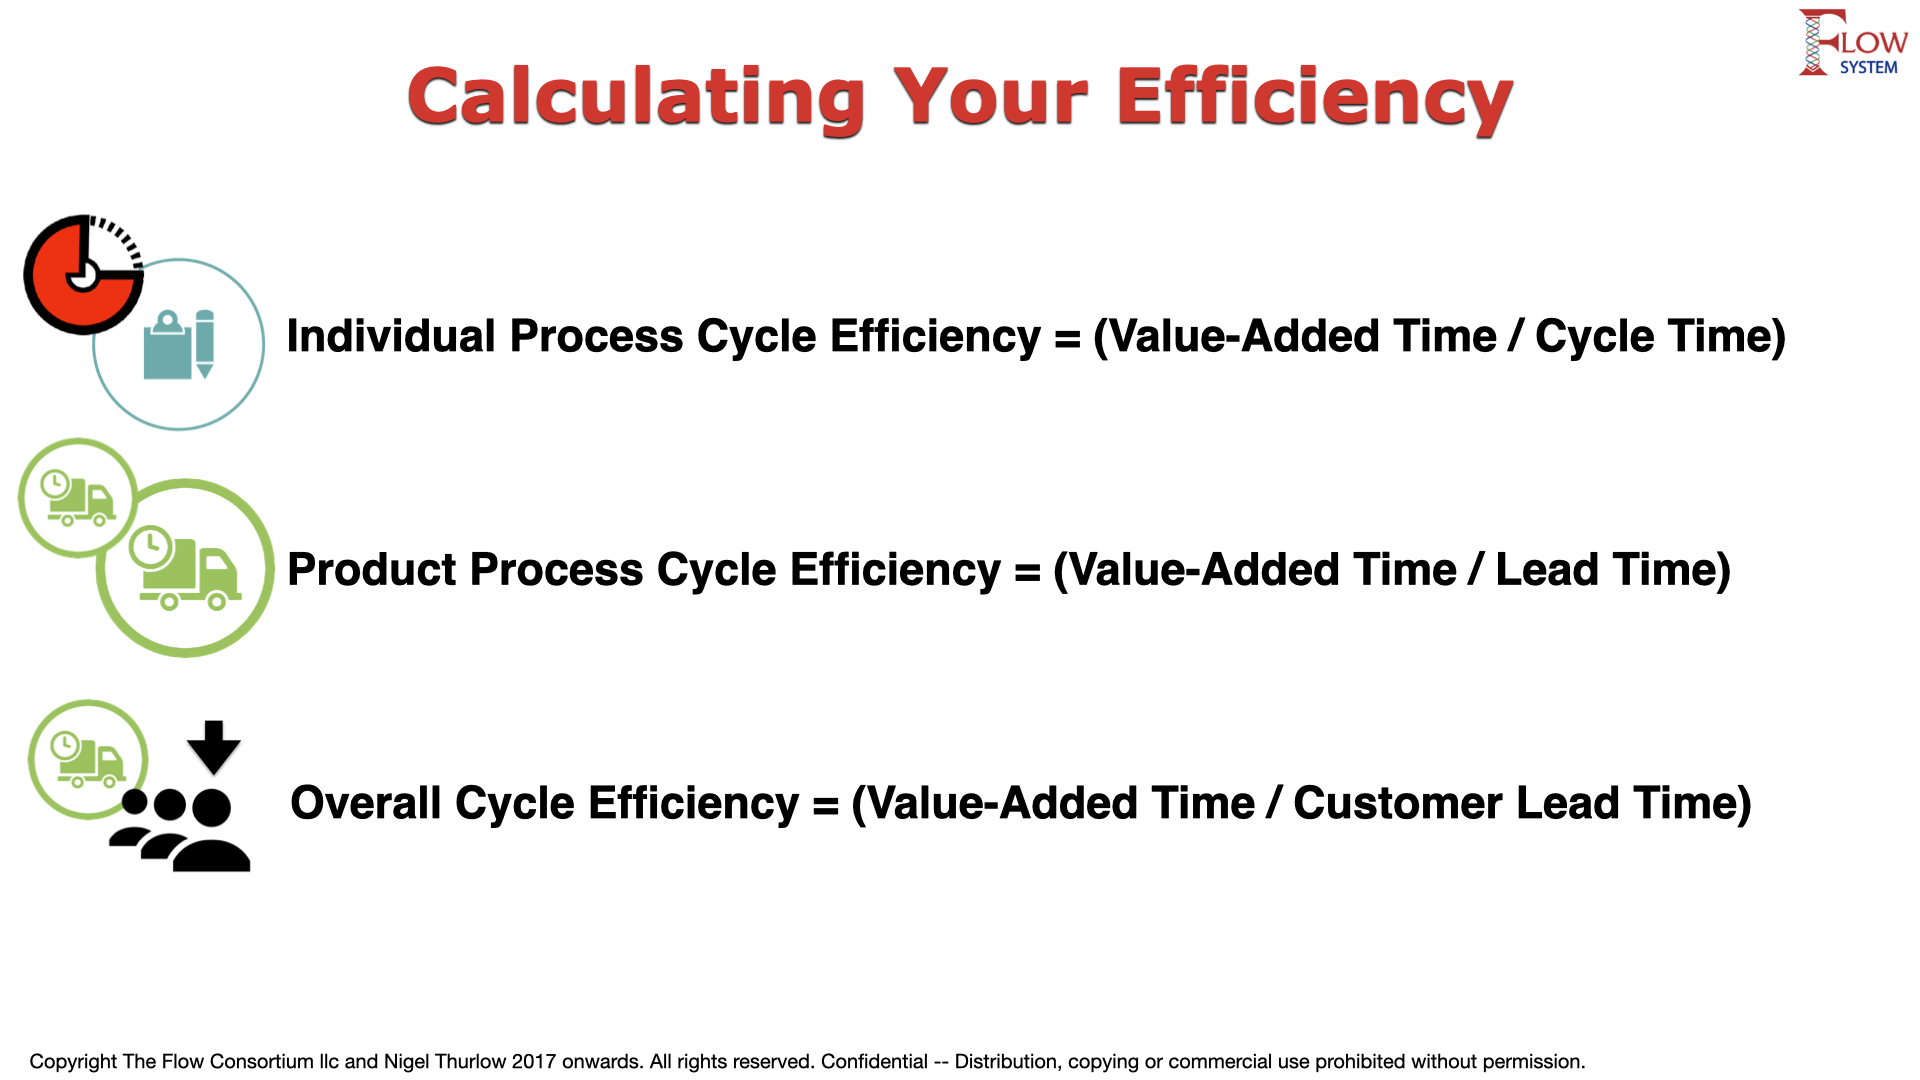 Image explaining how to calculate process cycle efficiency